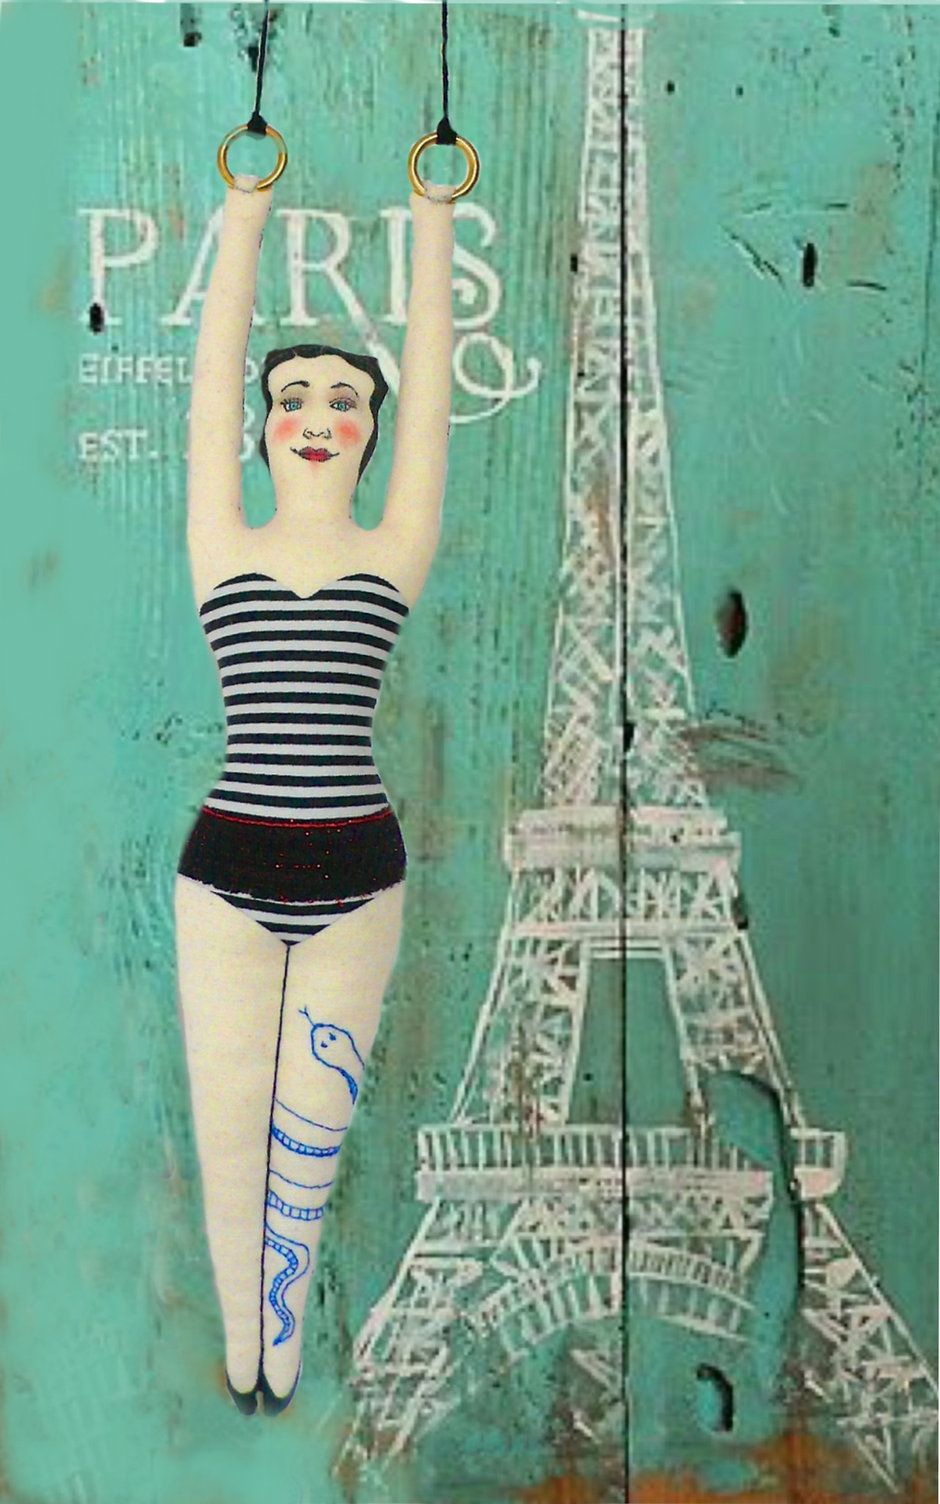 Art Of A Woman Hanging And Eiffel Tower Illustration